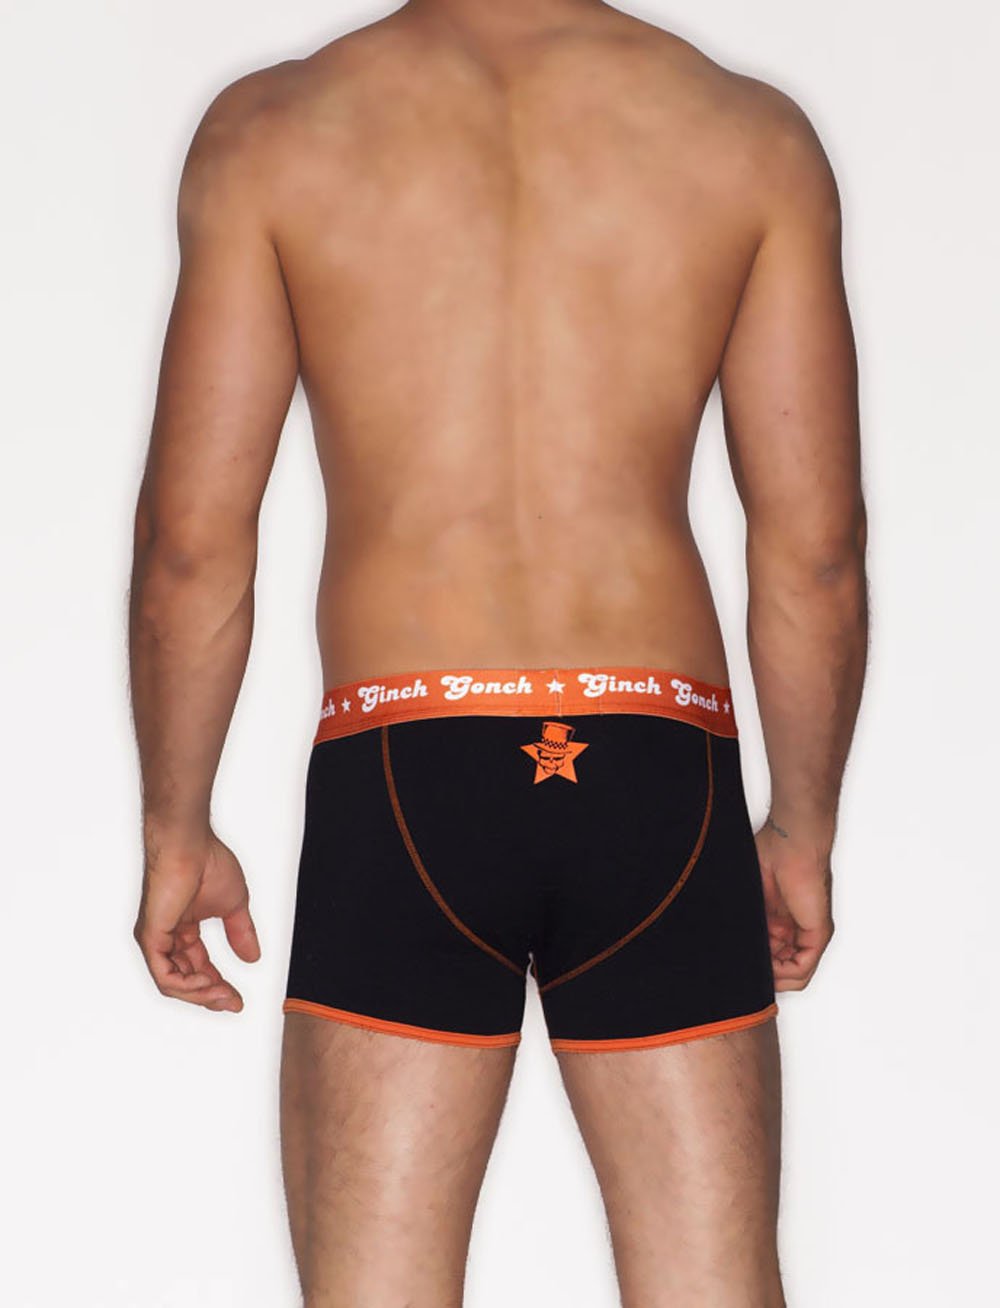 Ginch Gonch Rock Me men's Boxer Brief Trunk Underwear black with orange trim binding waistband front rock and roll Orange star and accents